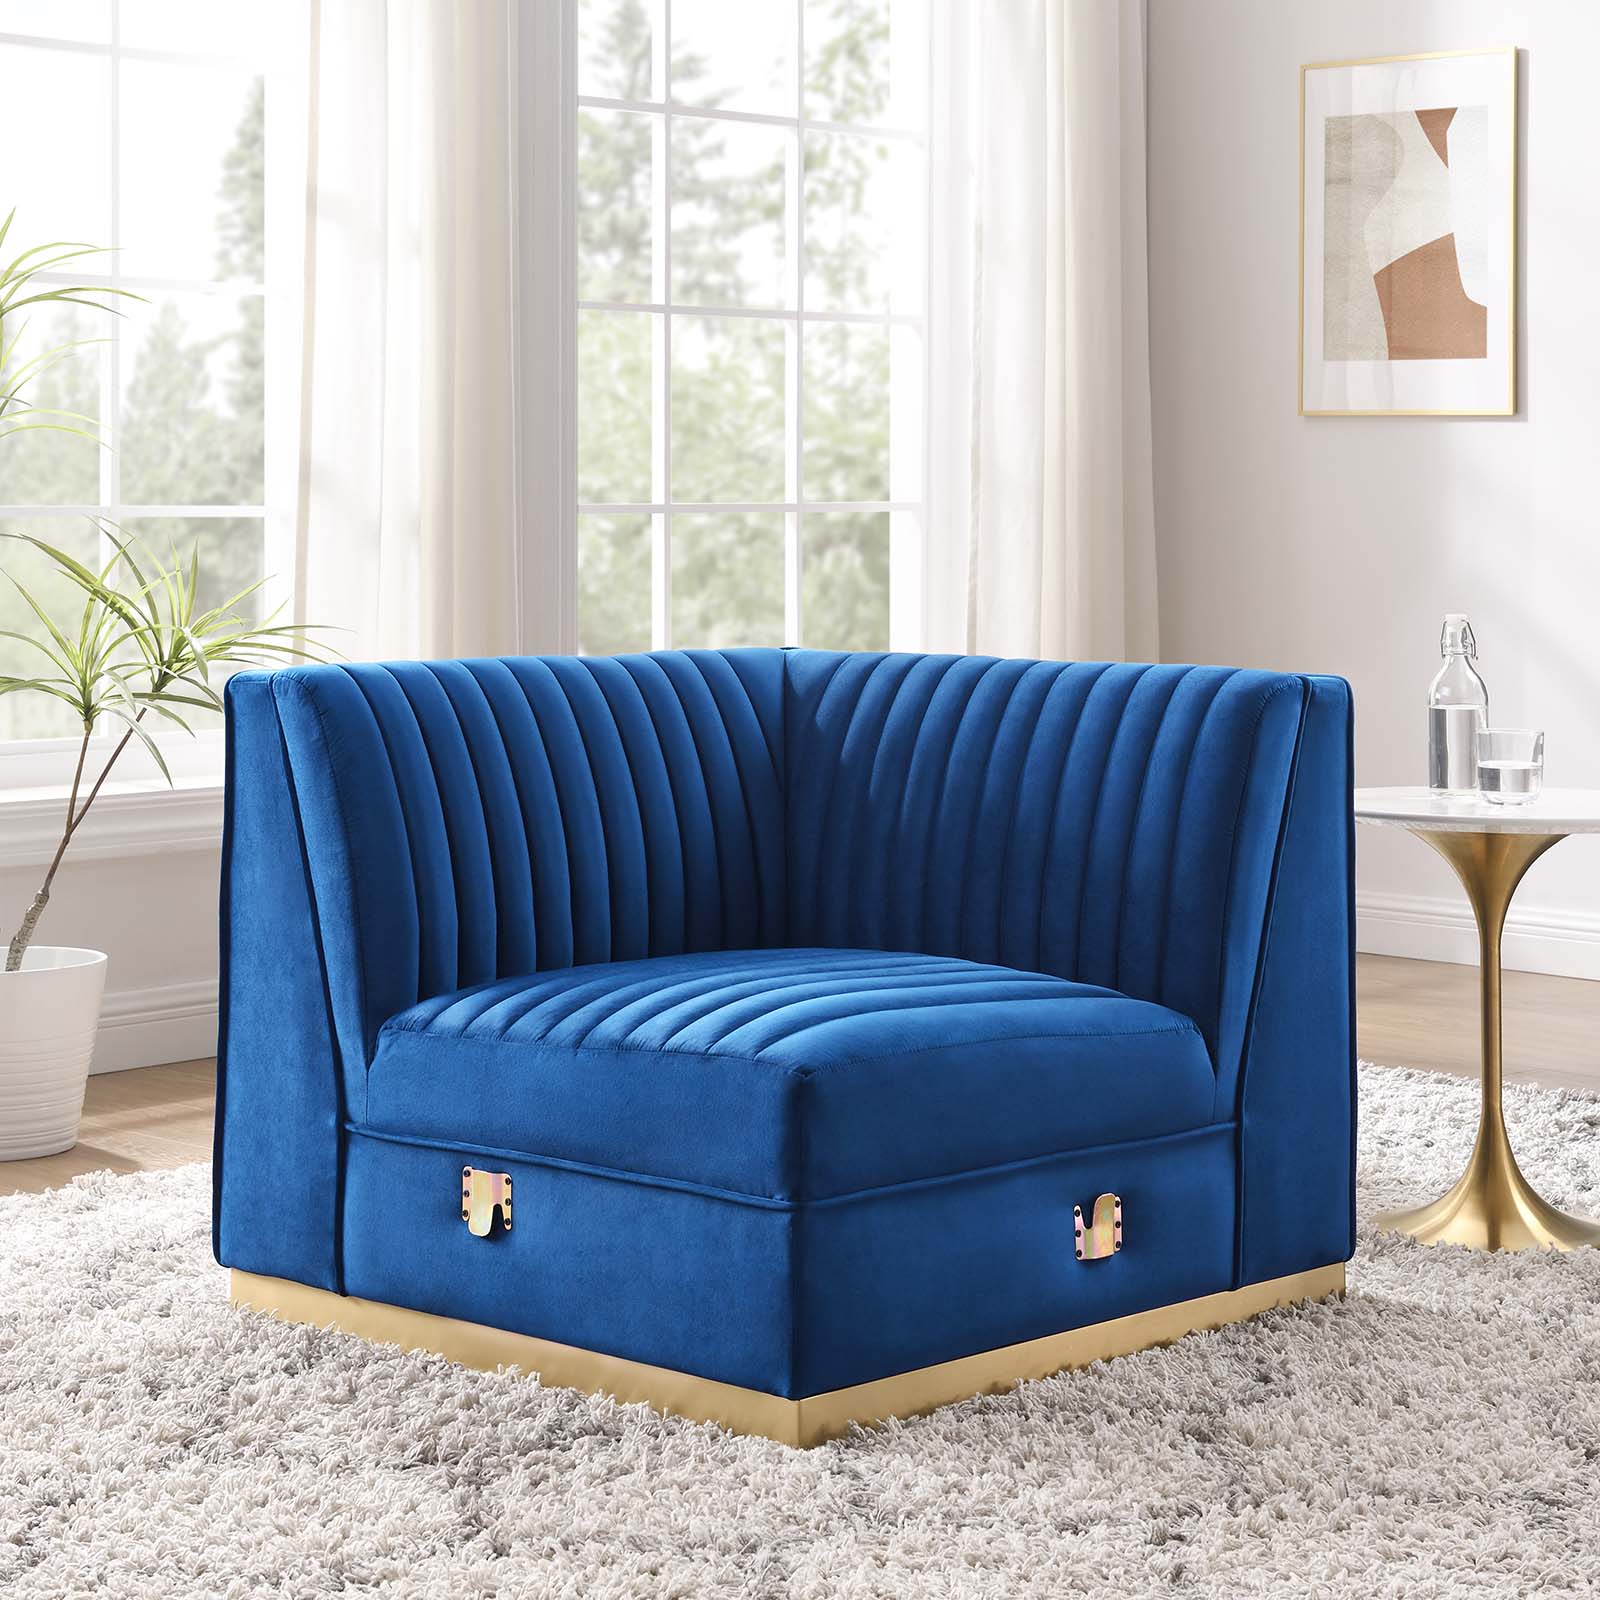 Modway Accent Chairs - Sanguine Channel Tufted Performance Velvet Modular Sectional Sofa Left Corner Chair Navy Blue